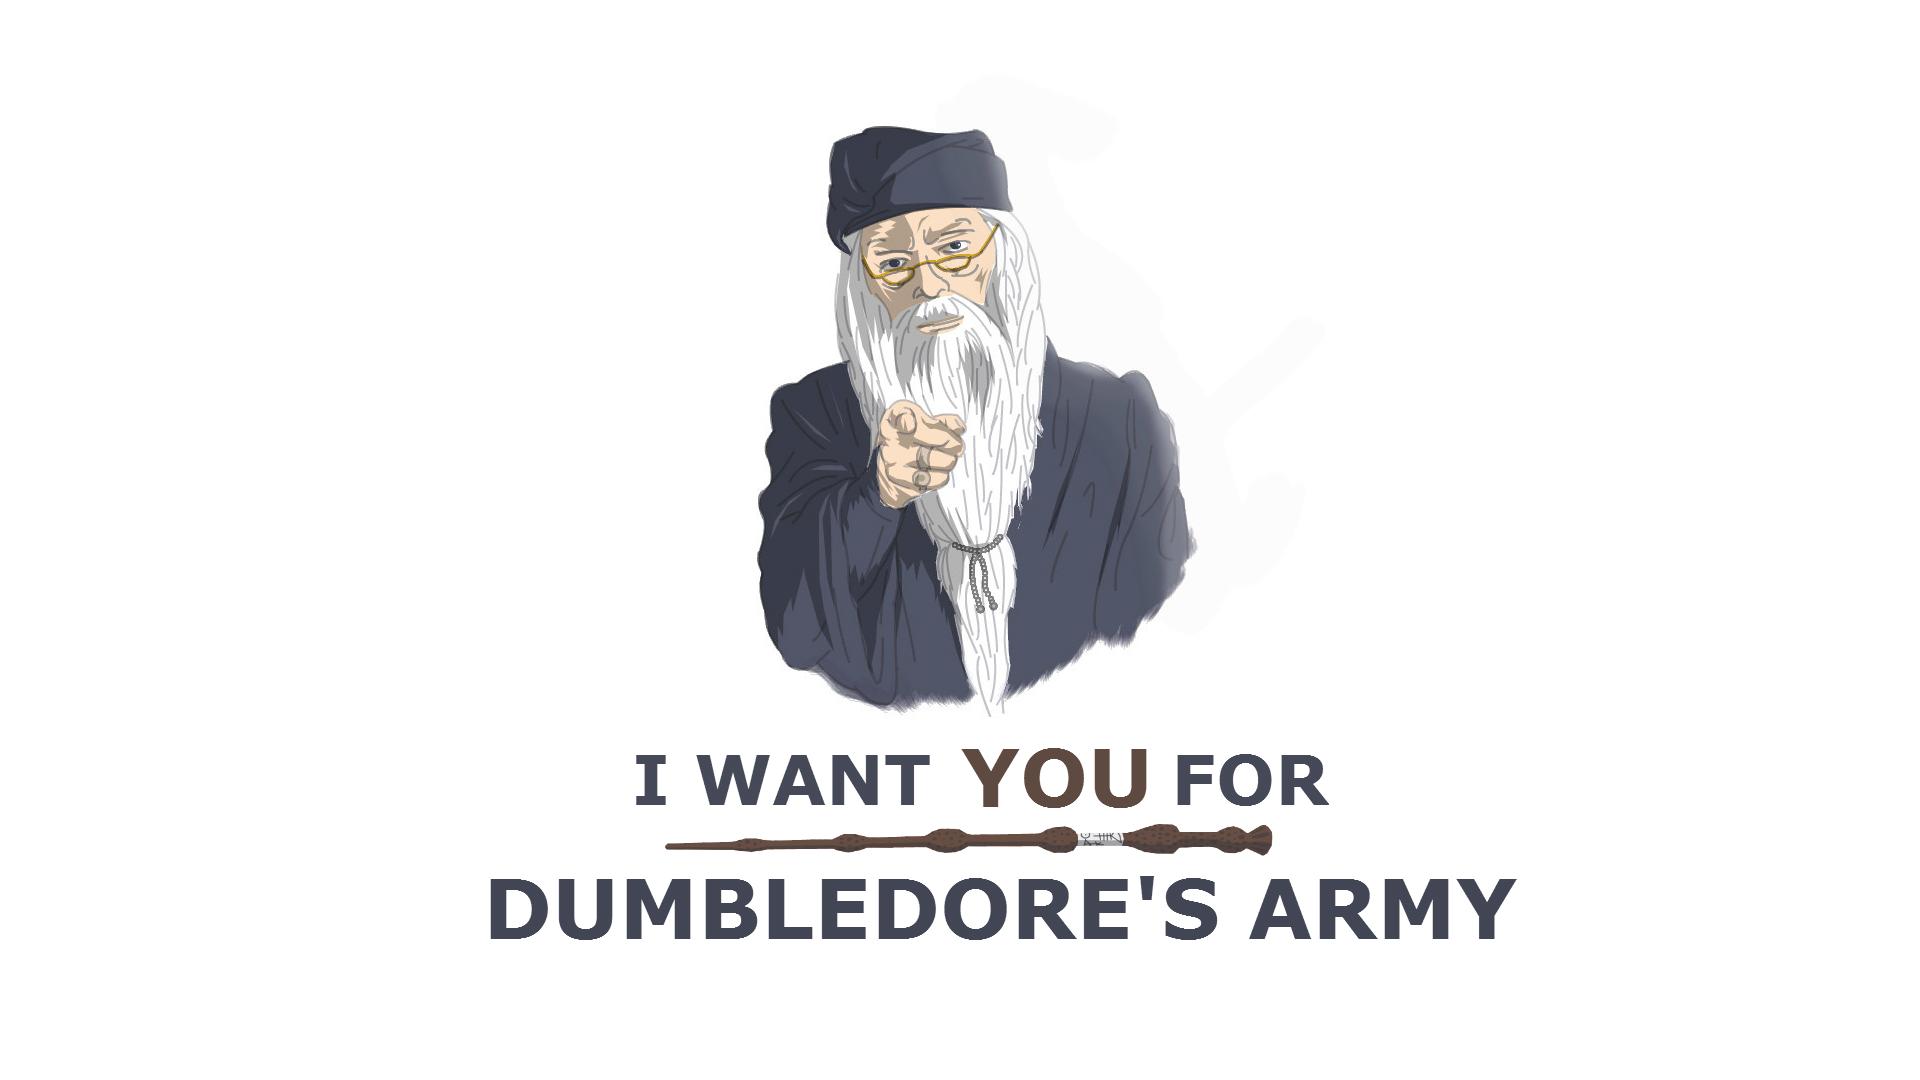 Dumbledore's Army poster & collages